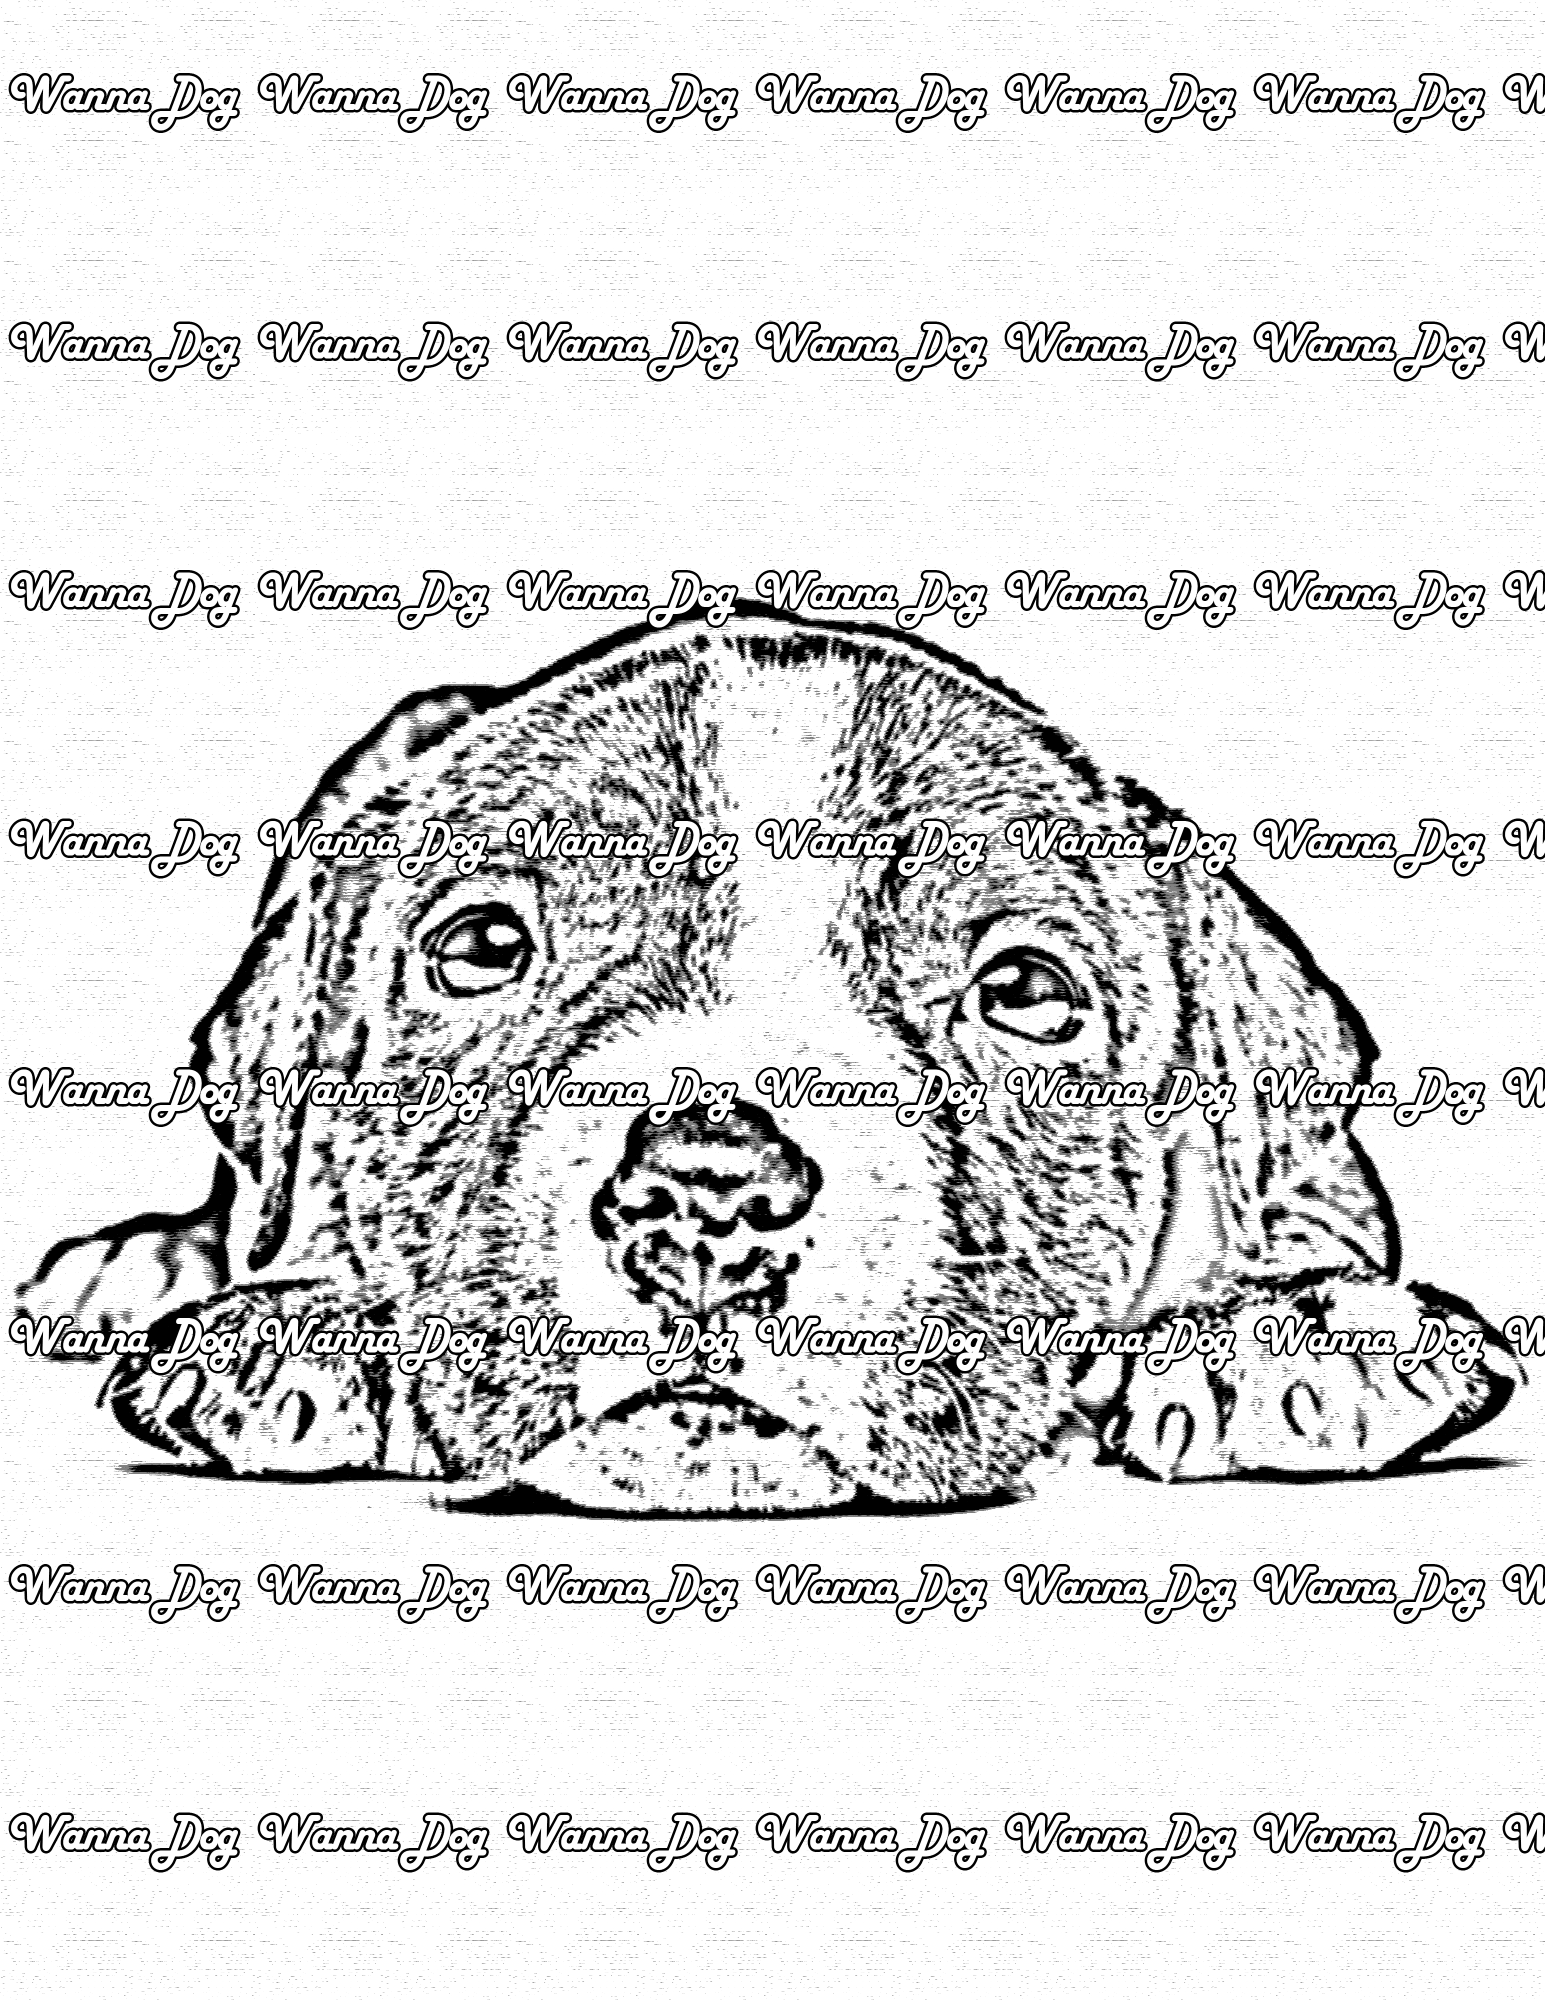 Pitbull Puppy Coloring Page of a Pitbull Puppy laying down and looking at the camera